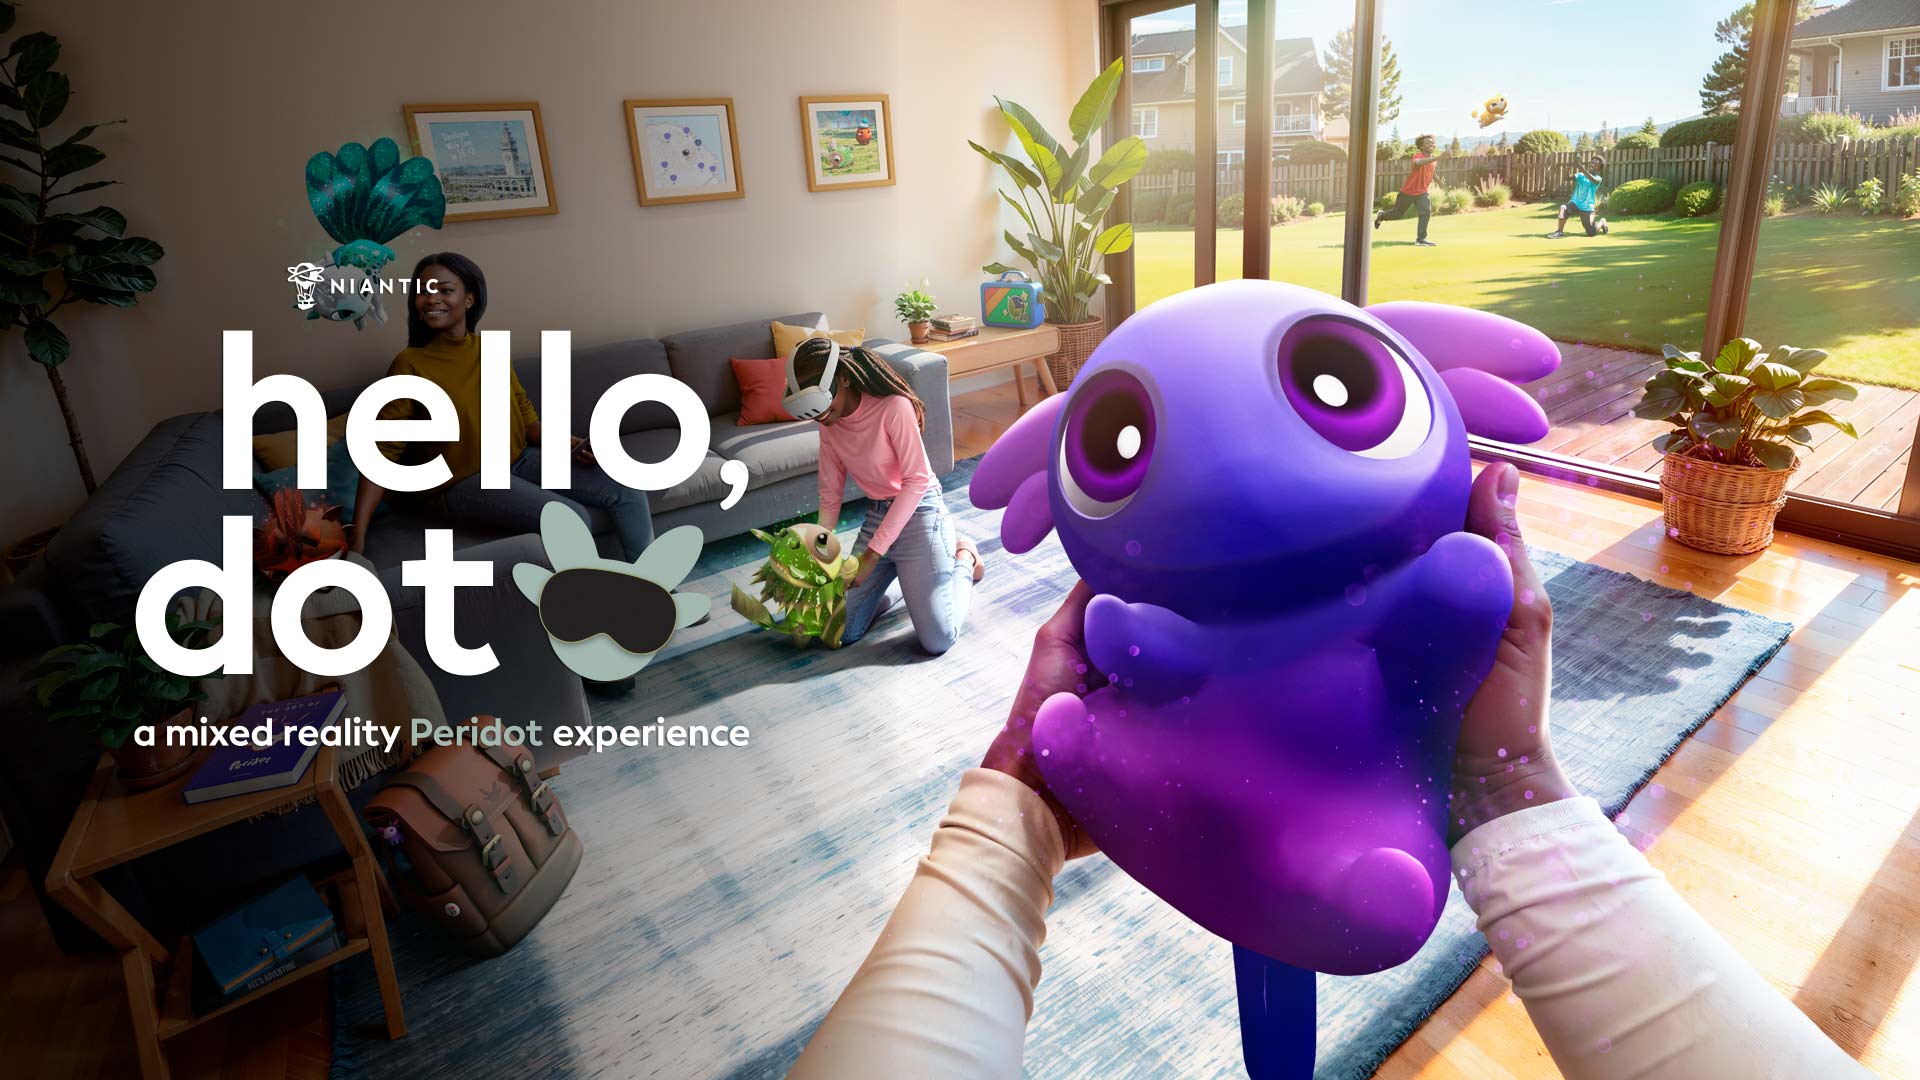 ‘Pokémon Go’ Studio Releases Combined Actuality Pet ‘Hiya, Dot’, Now Accessible on Quest 3